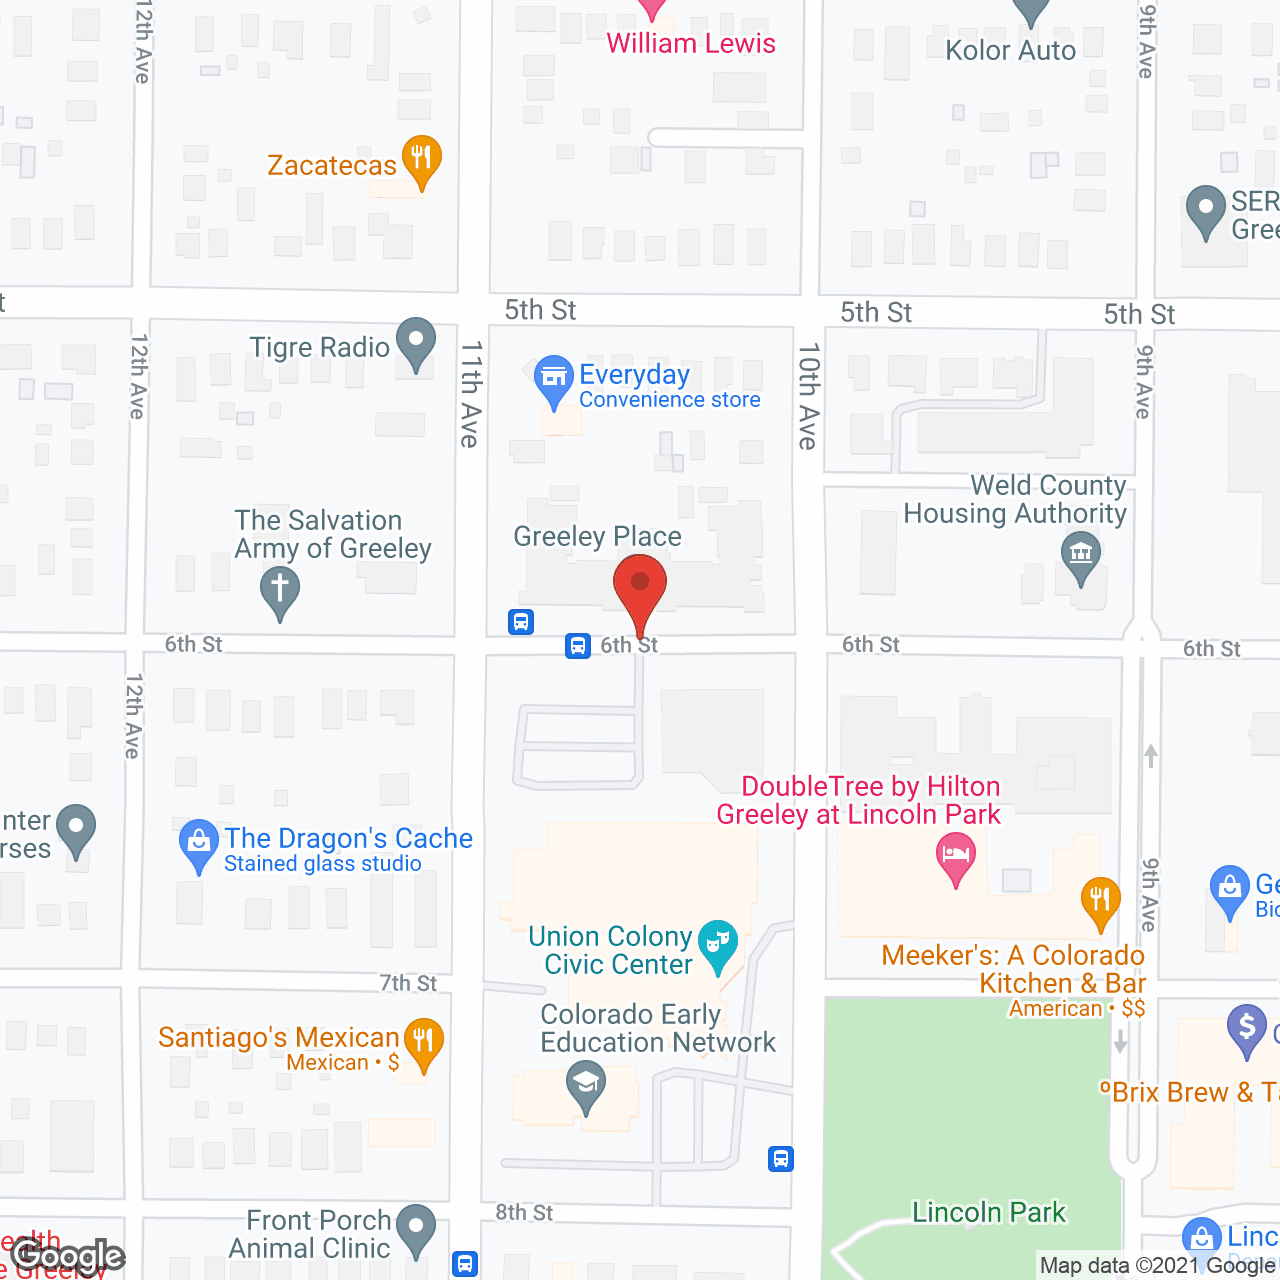 Greeley Place in google map